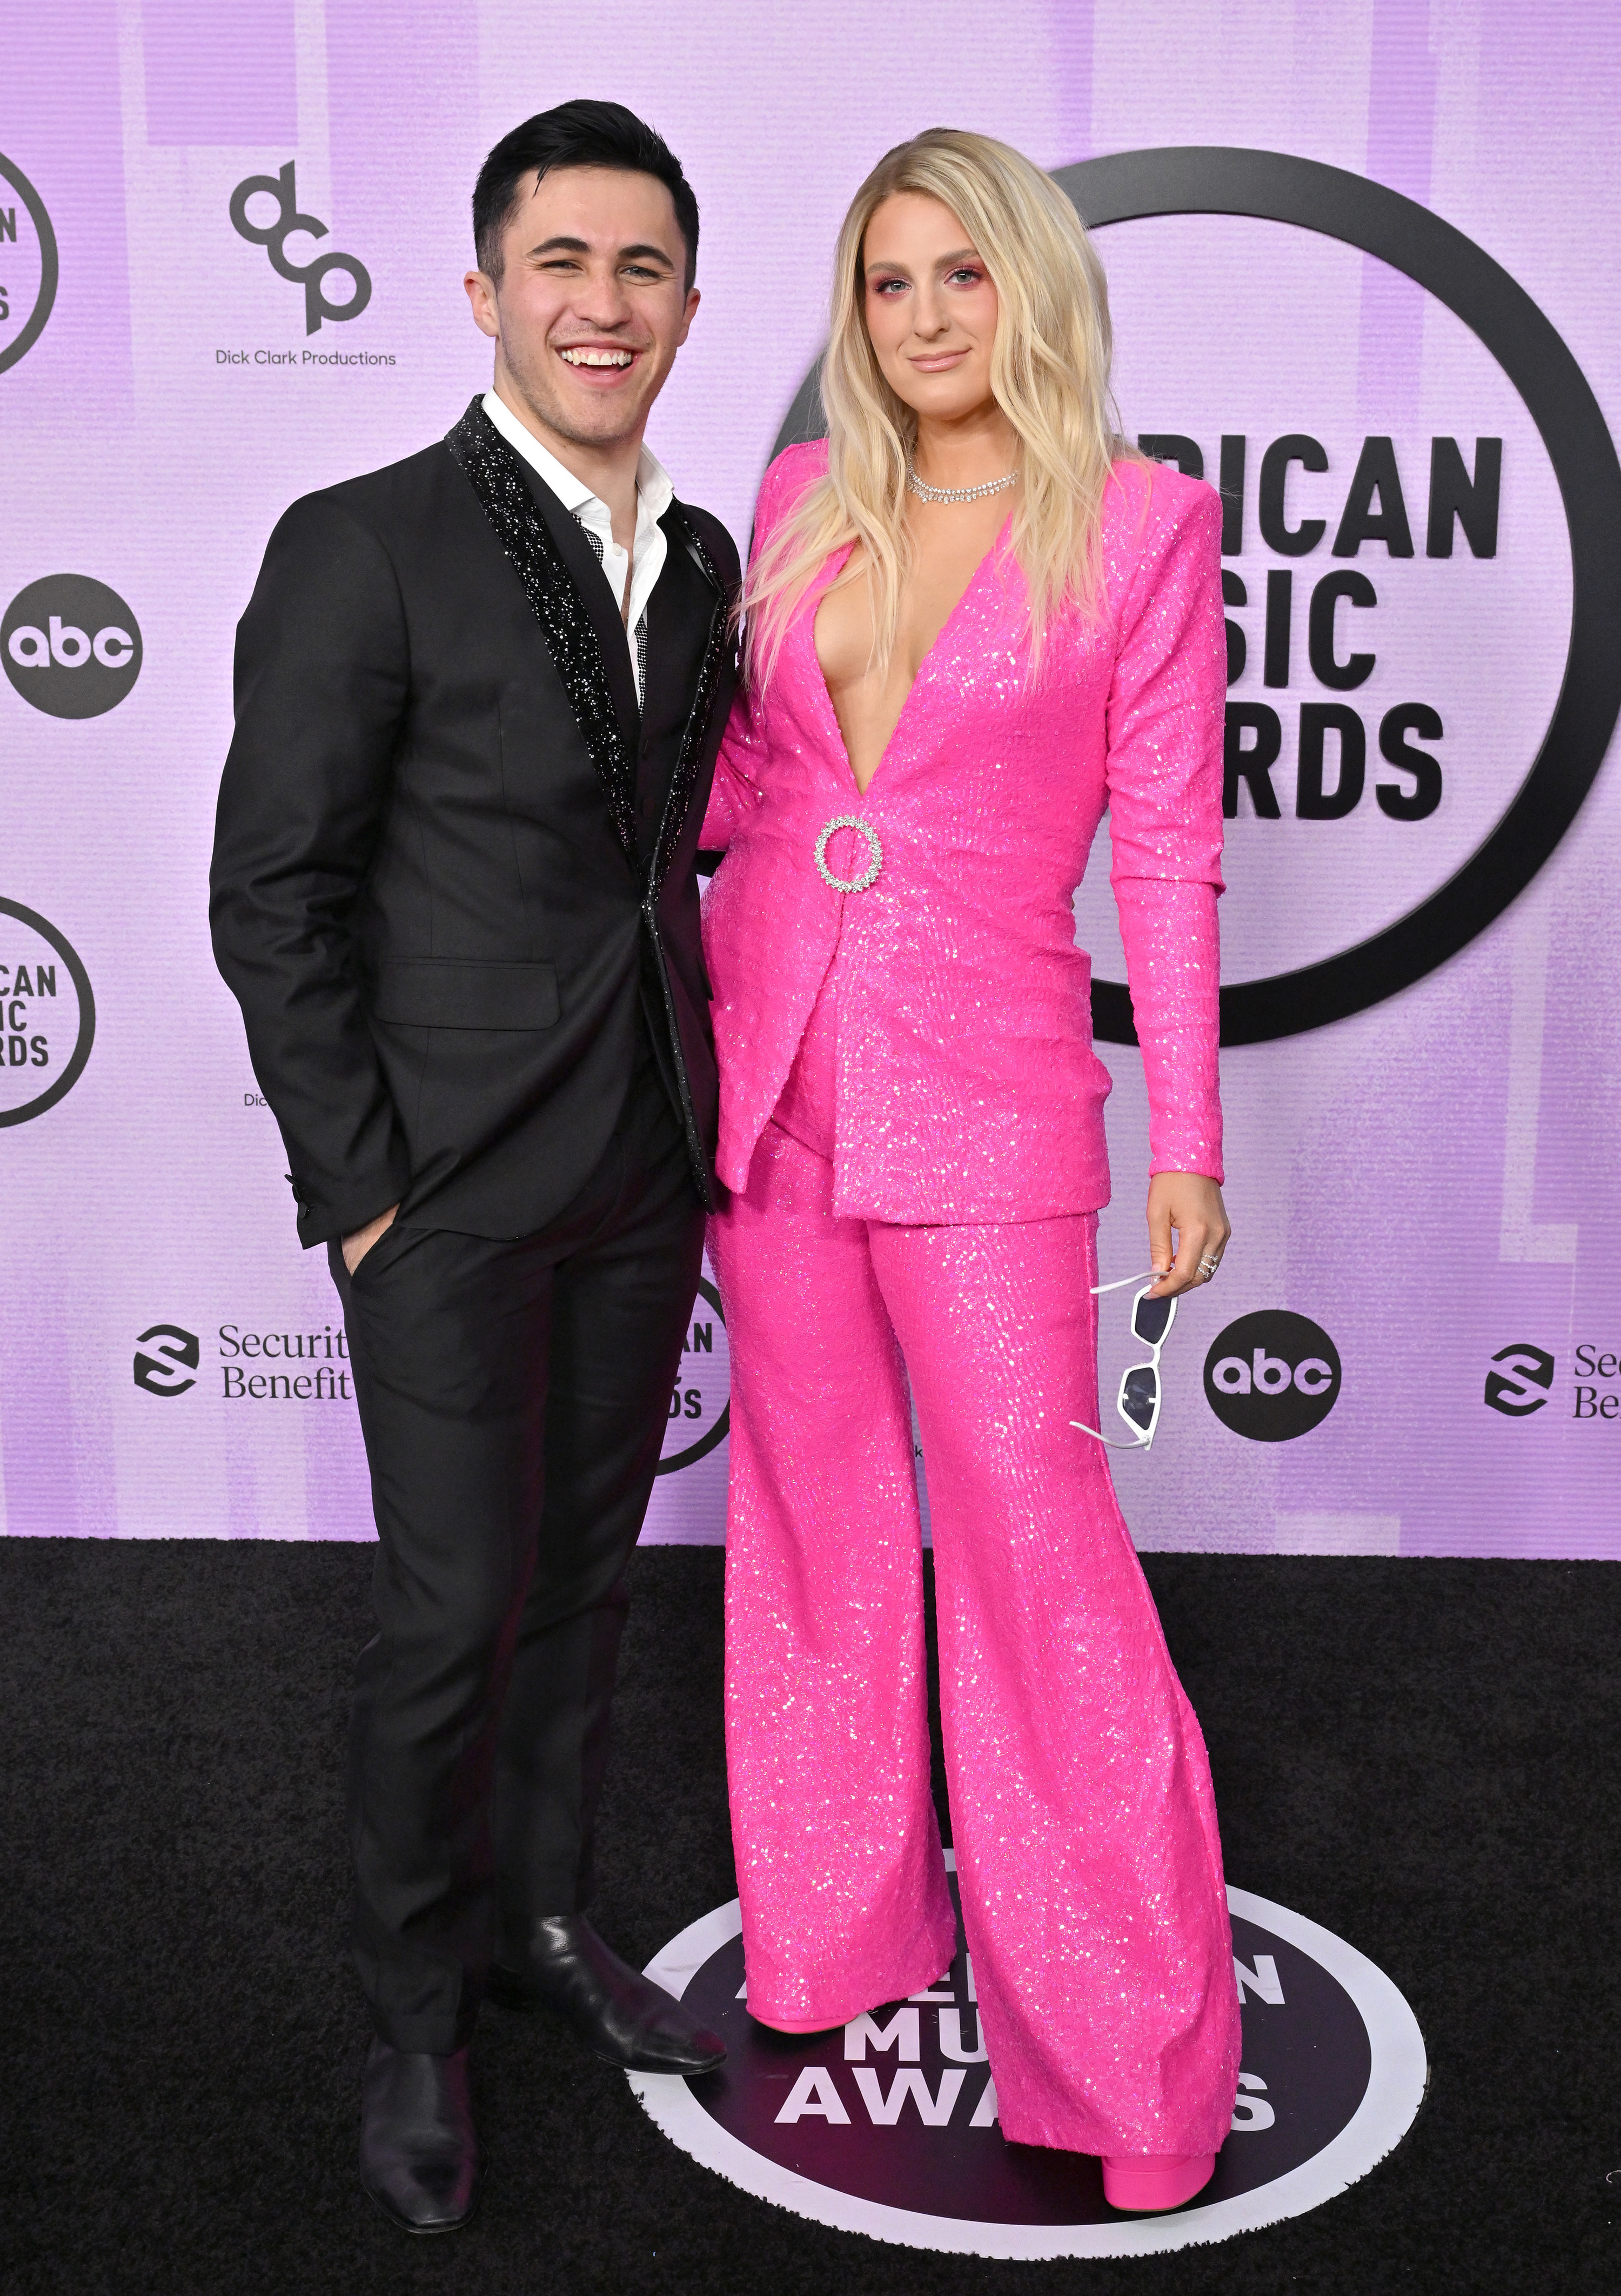 Chris Olsen poses on the red carpet for photographers with Megan Trainor